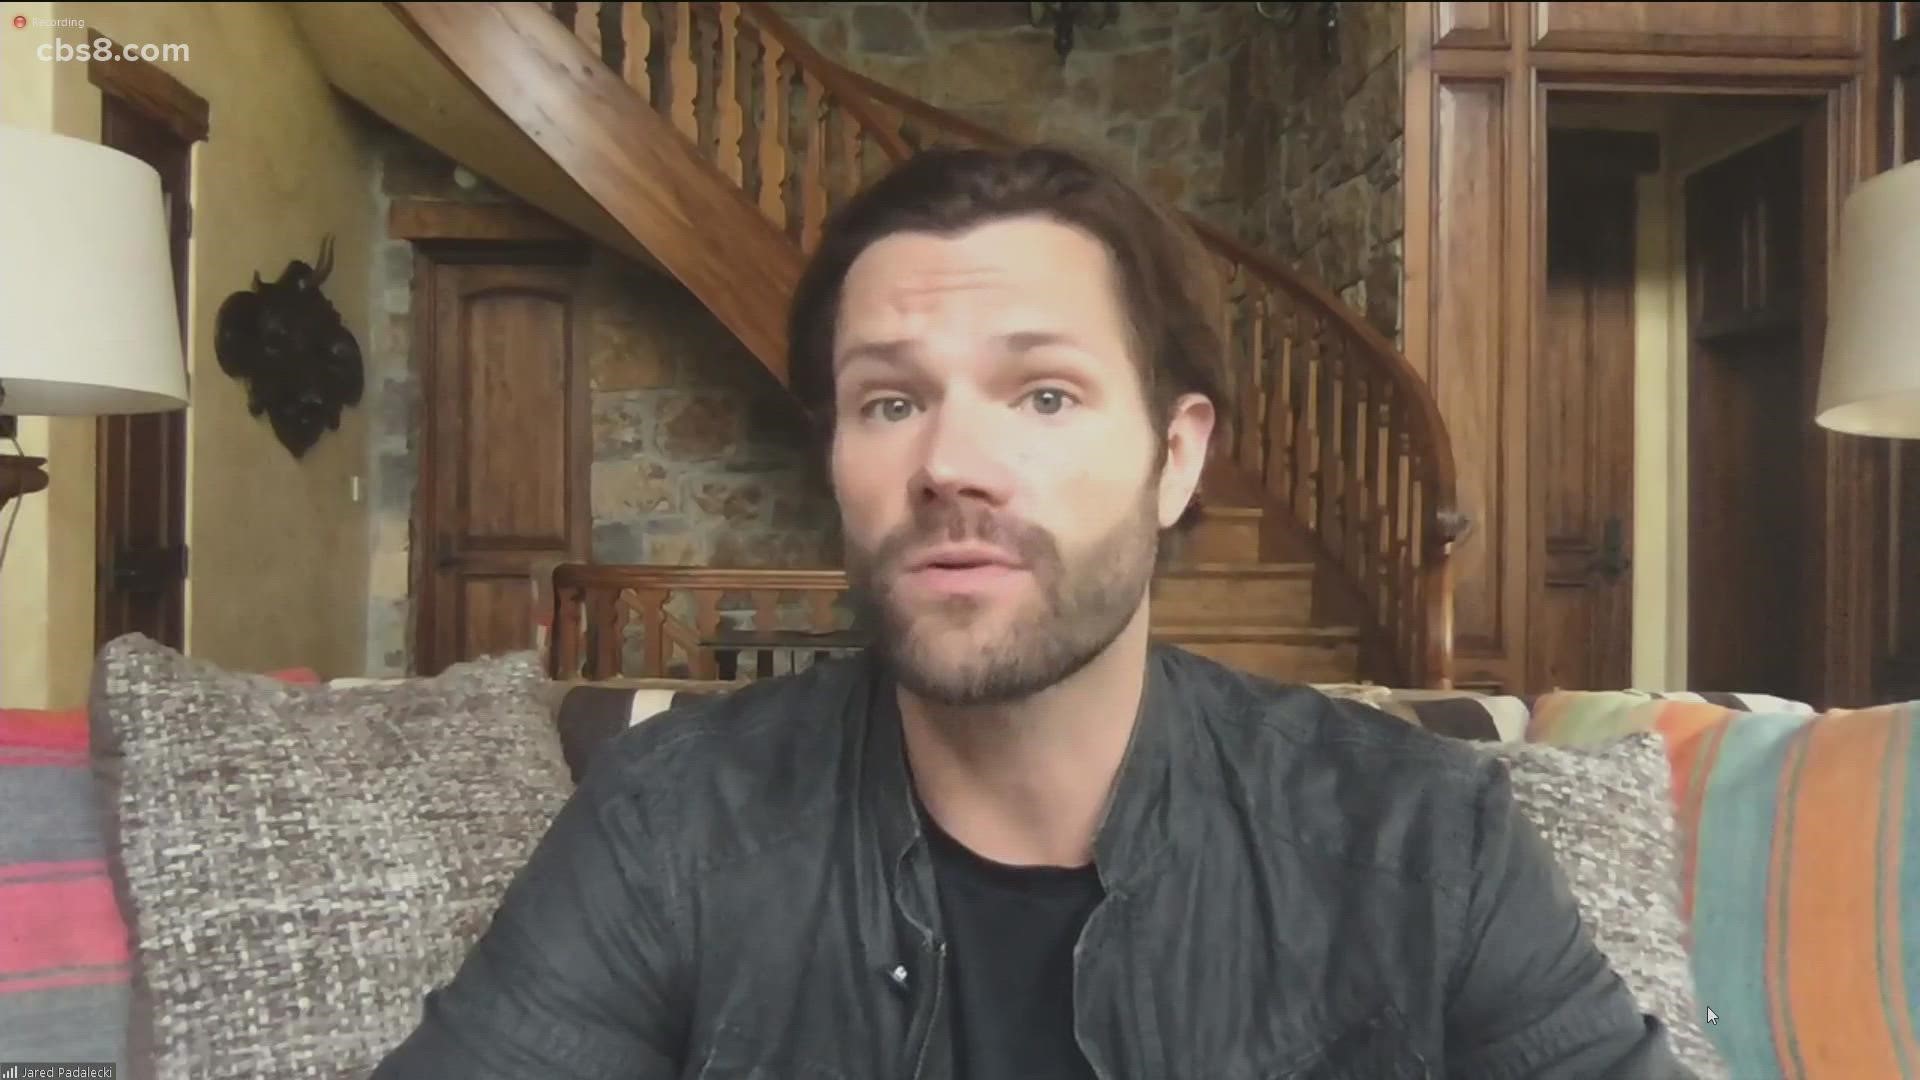 Jared Padalecki joined Morning Extra to talk about season 2 of Walker which debuts on November 4 on the CW San Diego.